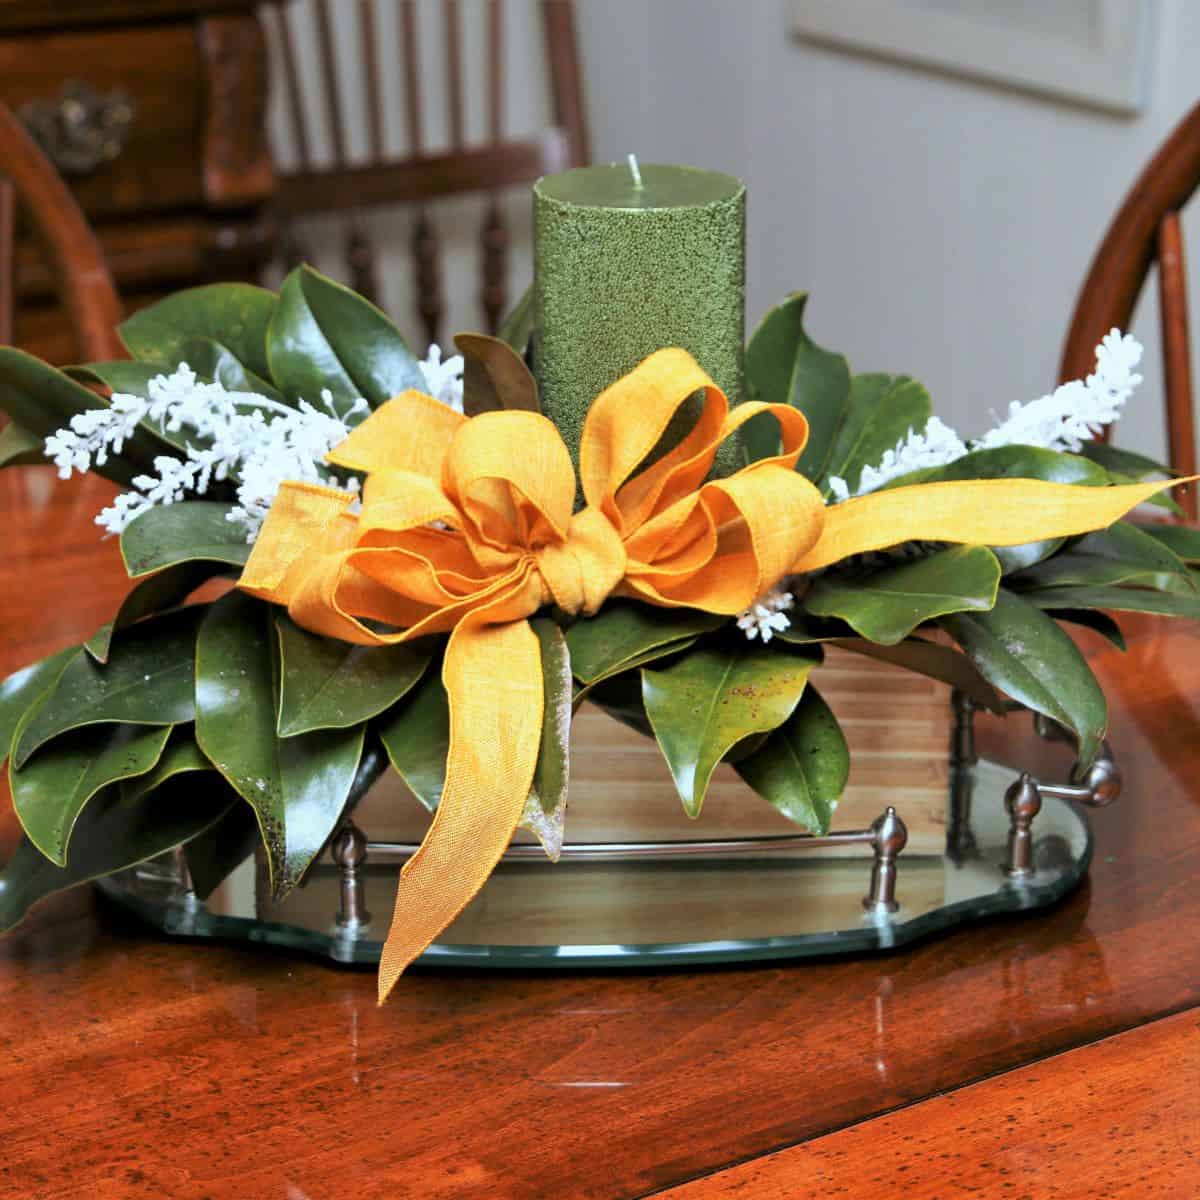 https://petticoatjunktion.com/wp-content/uploads/2022/01/how-to-make-a-beautiful-floral-centerpiece-for-the-table-using-magnolia-leaves.jpg